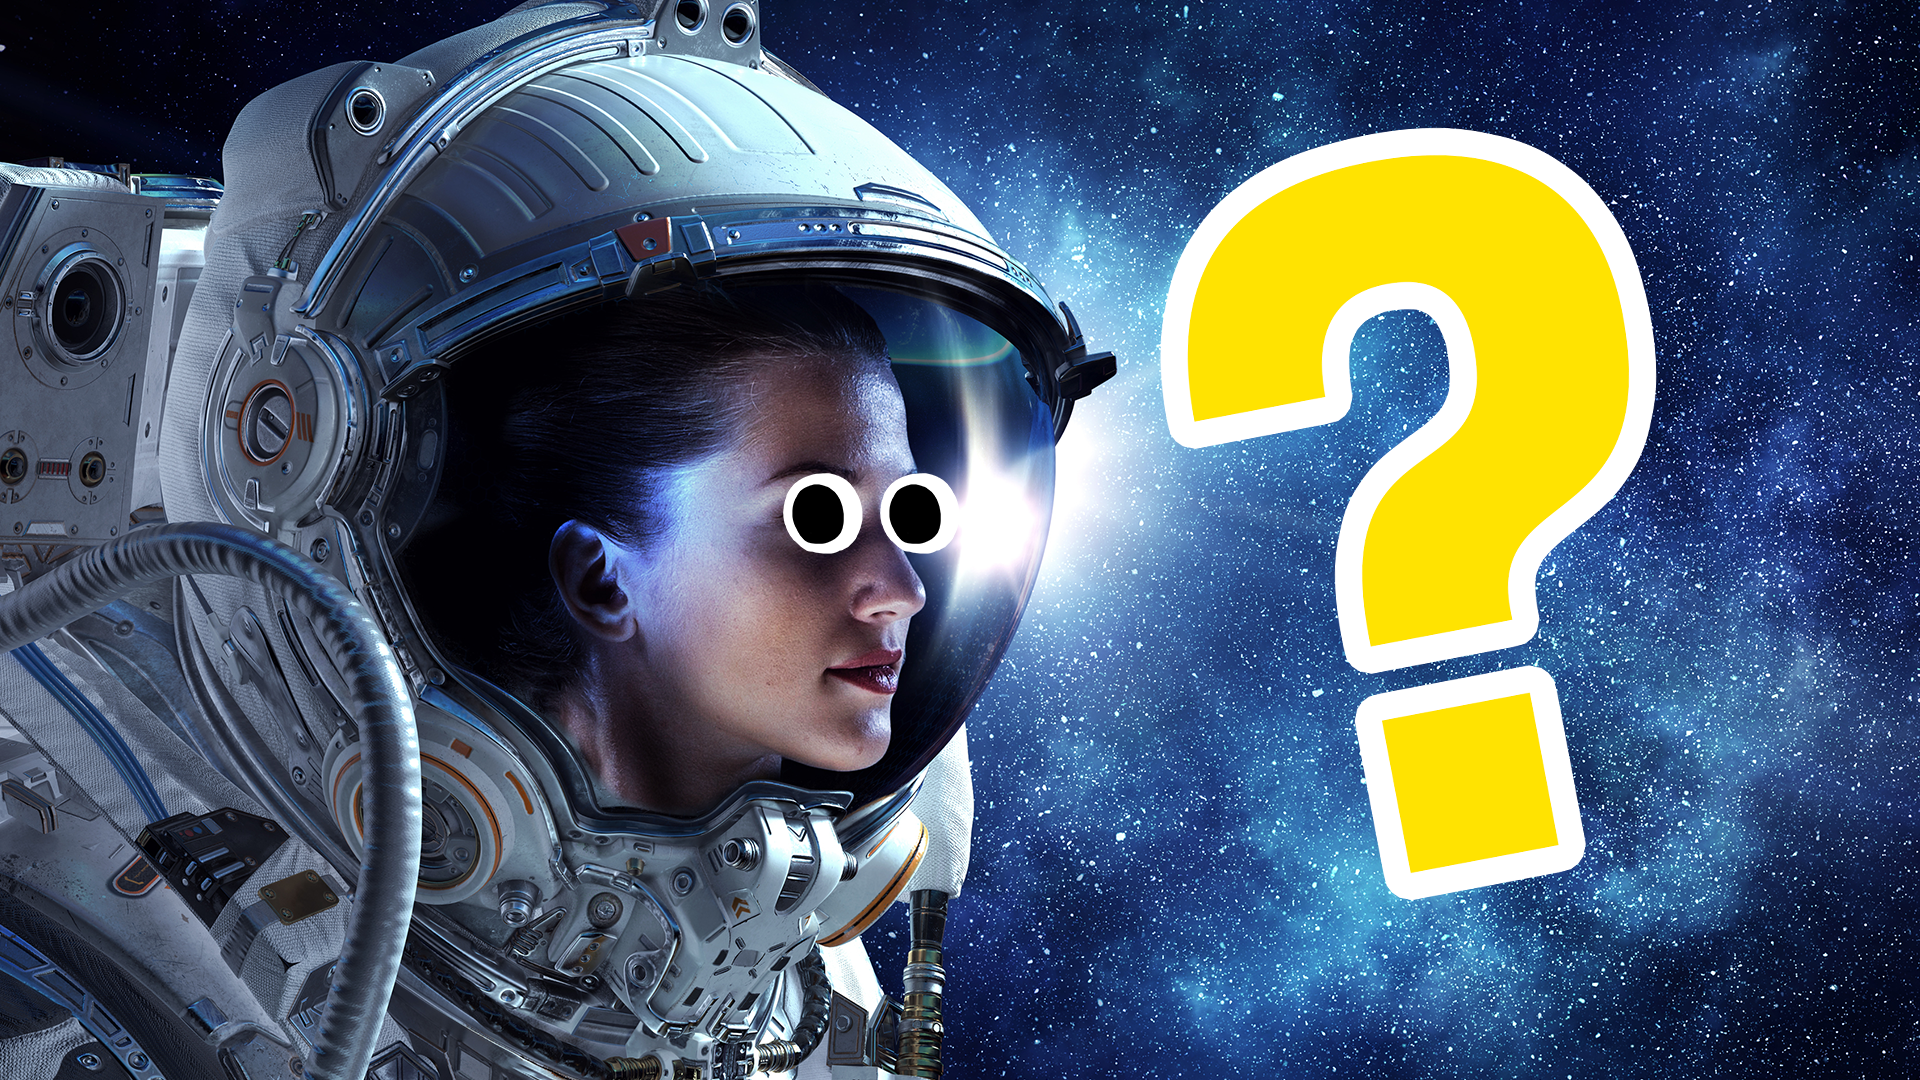 Female astronaut in space and question mark